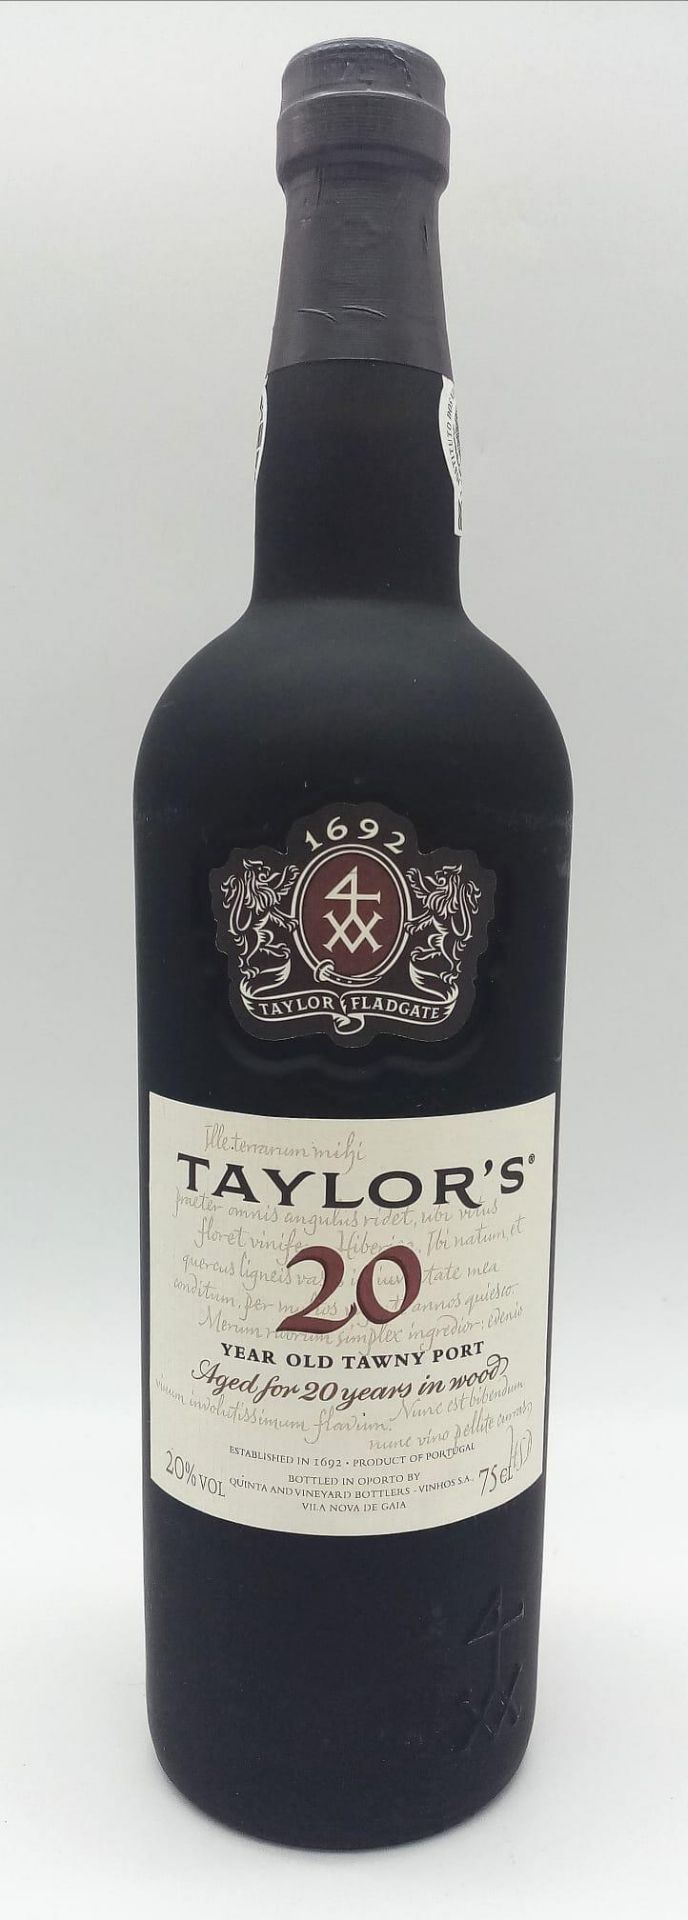 A Scarce Presentation Boxed Bottle of Taylors 20 Year Old Tawny Port. Full Contents, Unopened.